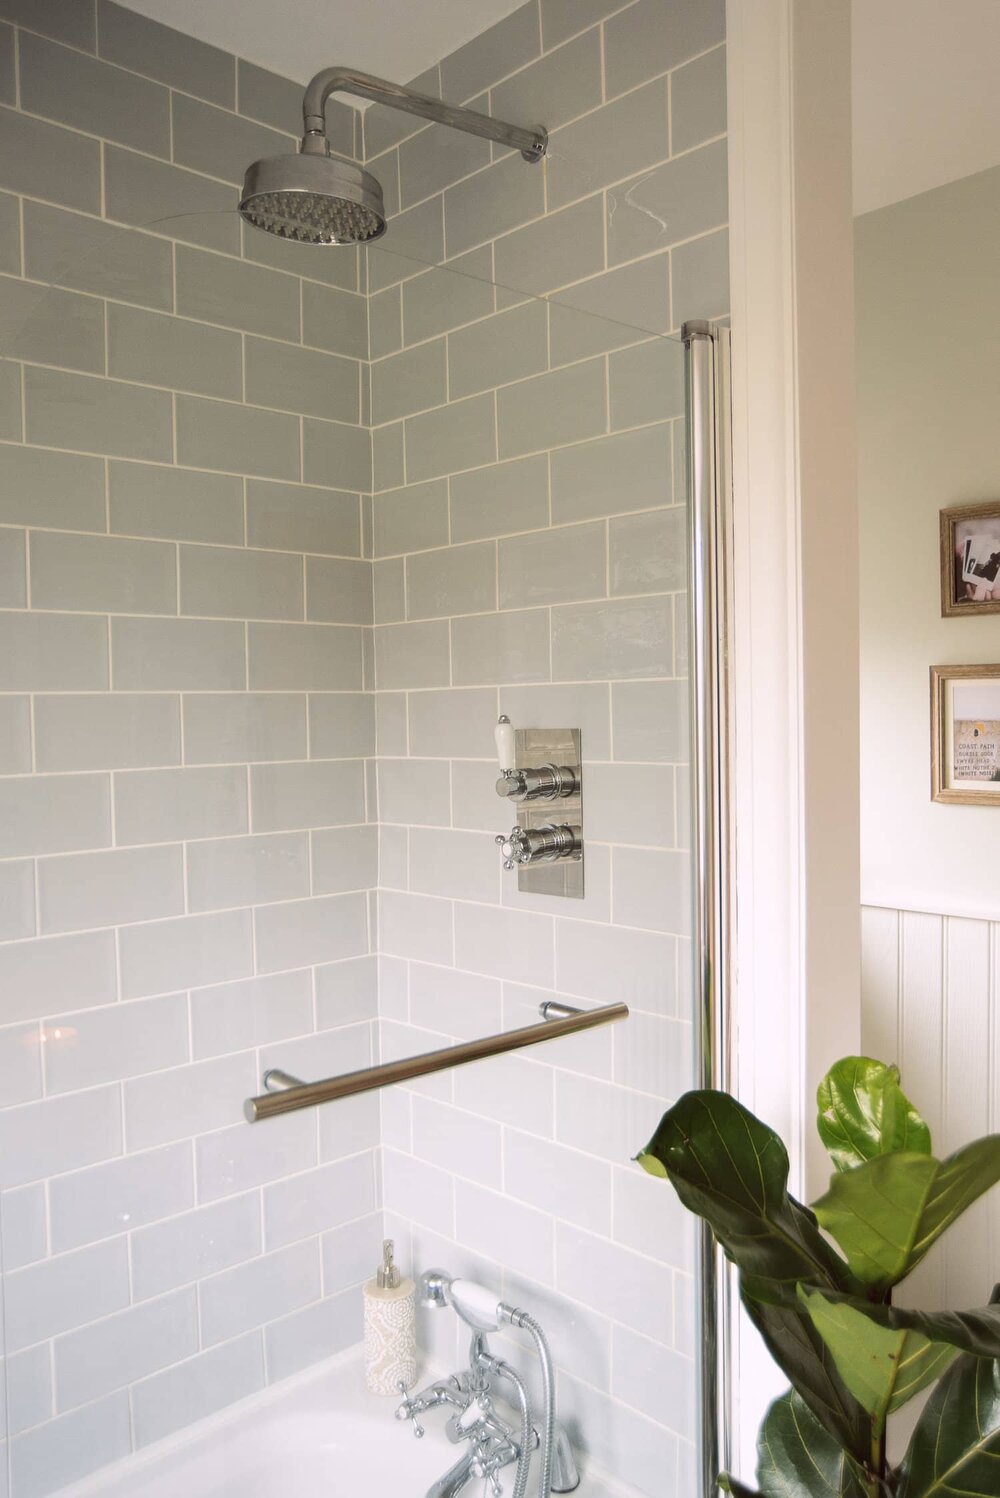 A Bathroom Renovation Cost, How Much Does It Cost To Remodel A Small Bathroom Uk